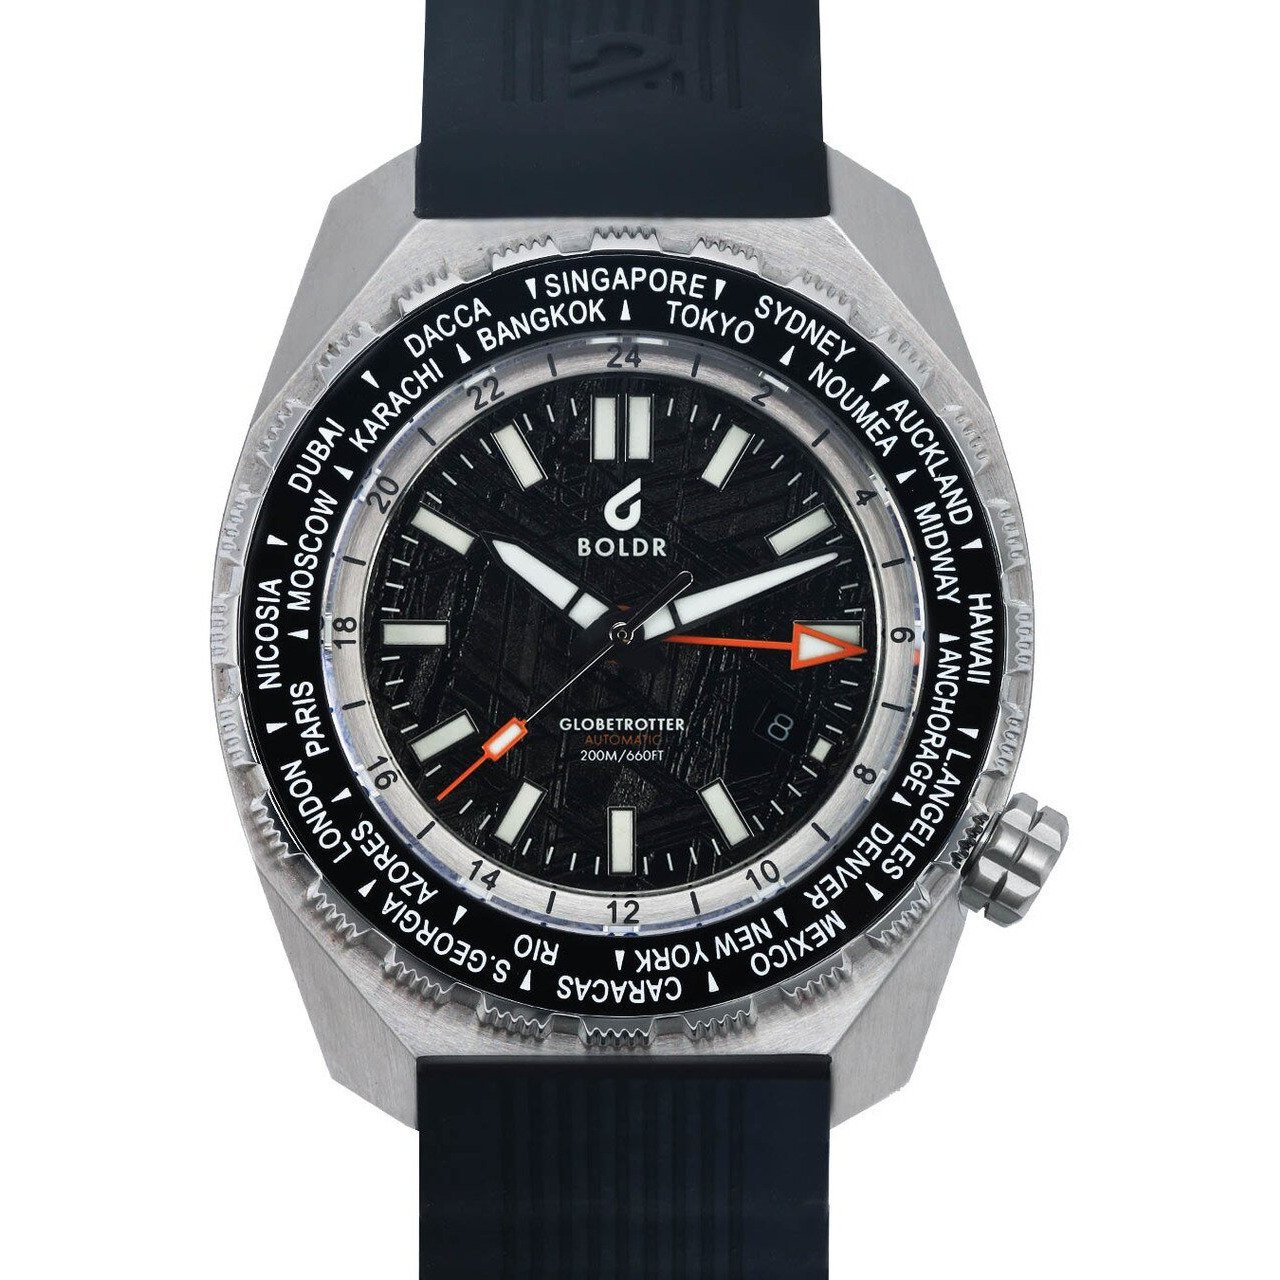 BOLDR Globetrotter GMT Swiss Automatic Meteorite Black Limited E